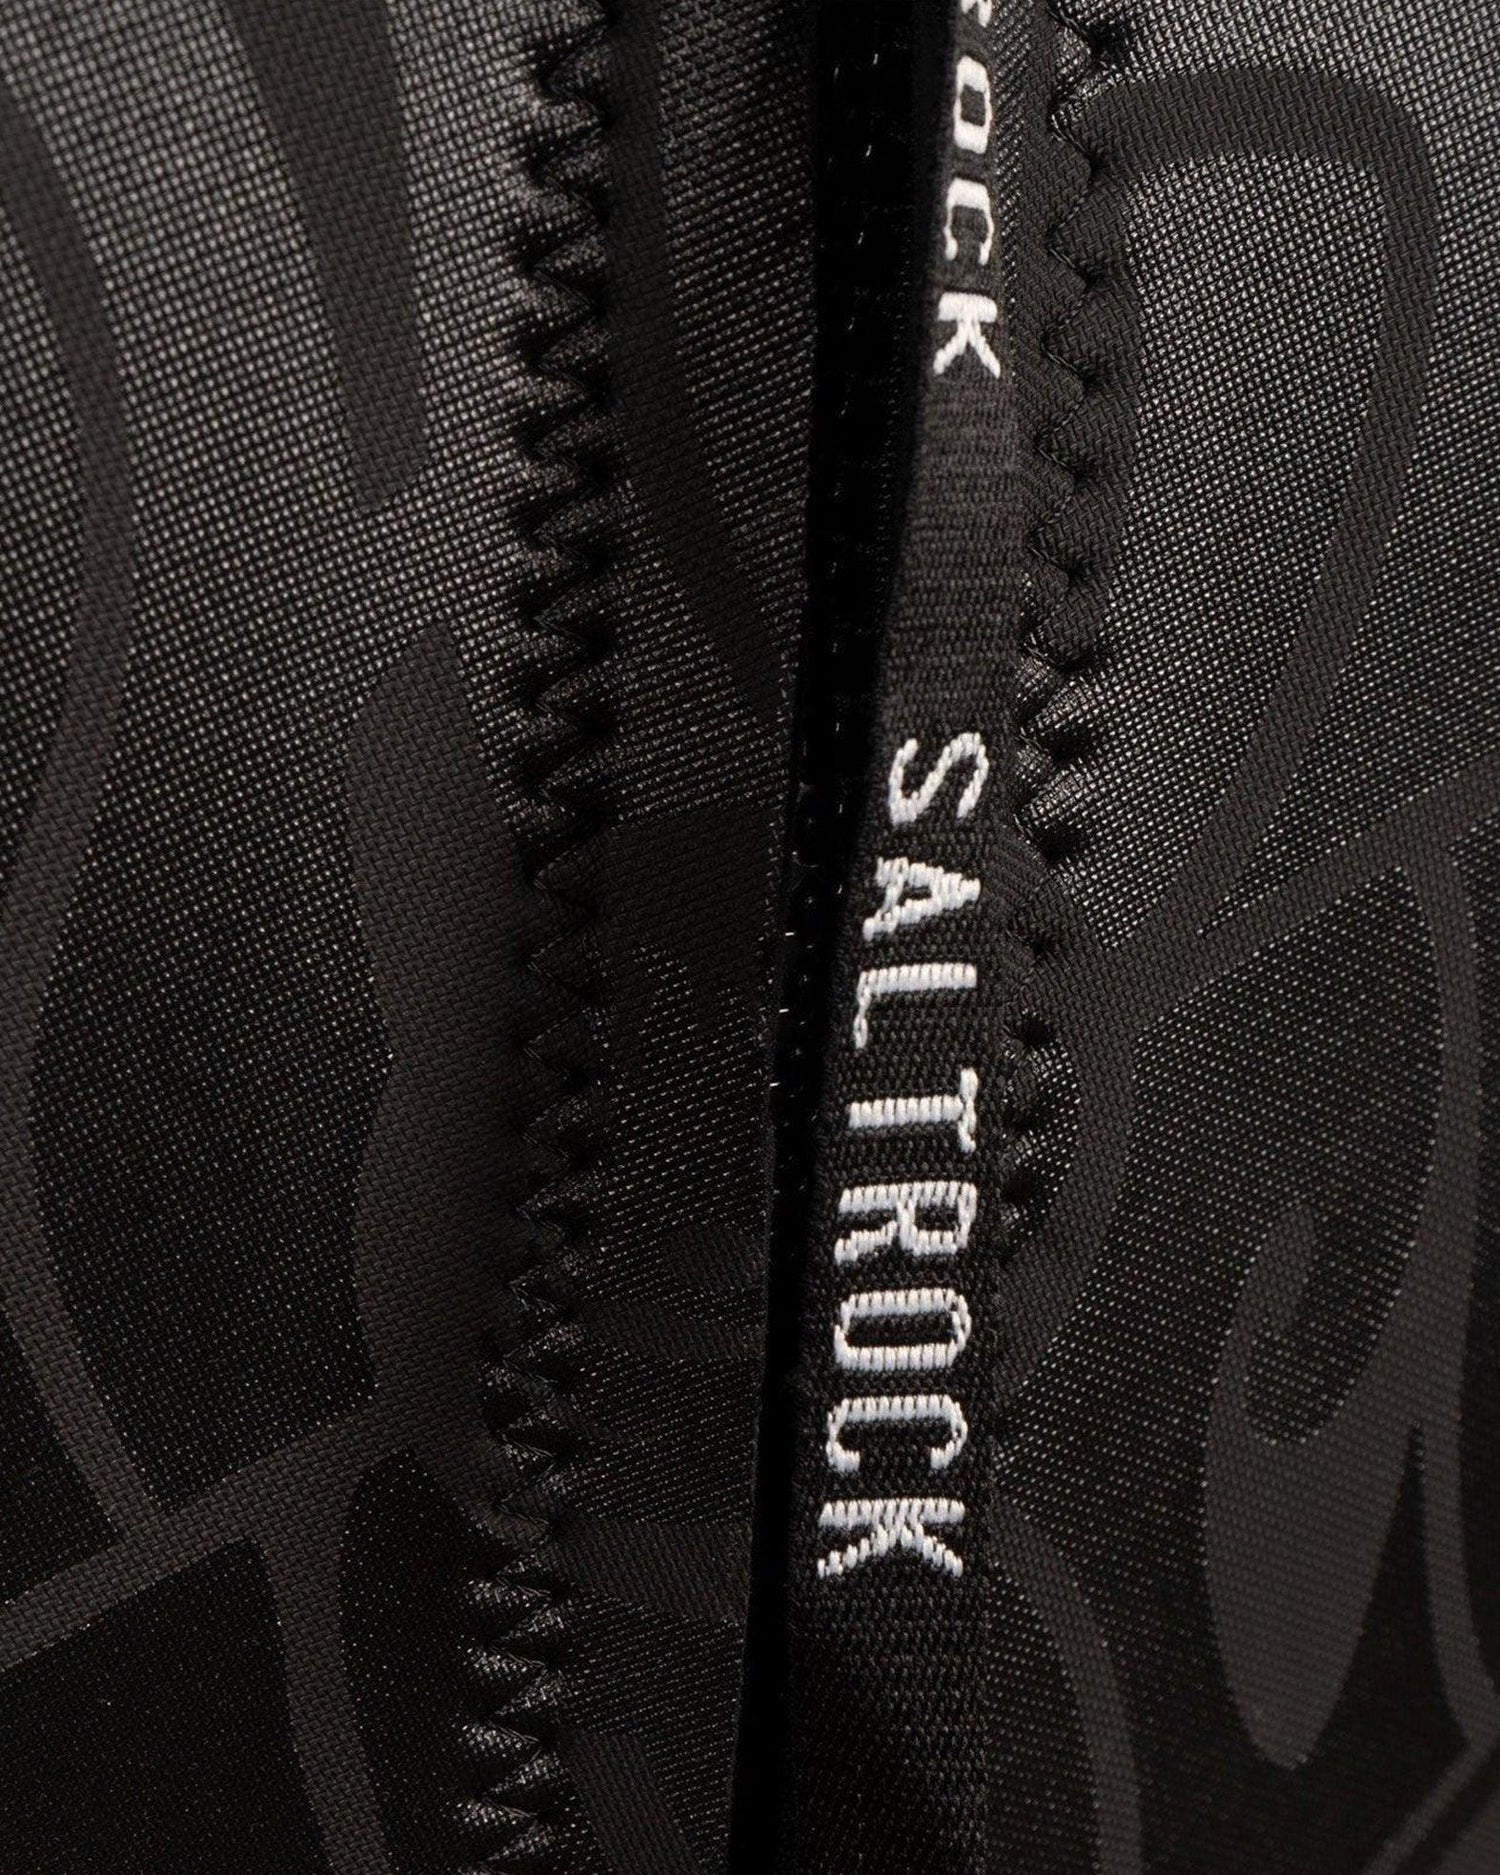 Close-up of a Saltrock-branded Core - Men's 3/2 Shortie Wetsuit in Black/Blue with textured neoprene design and visible YKK zipper detail.